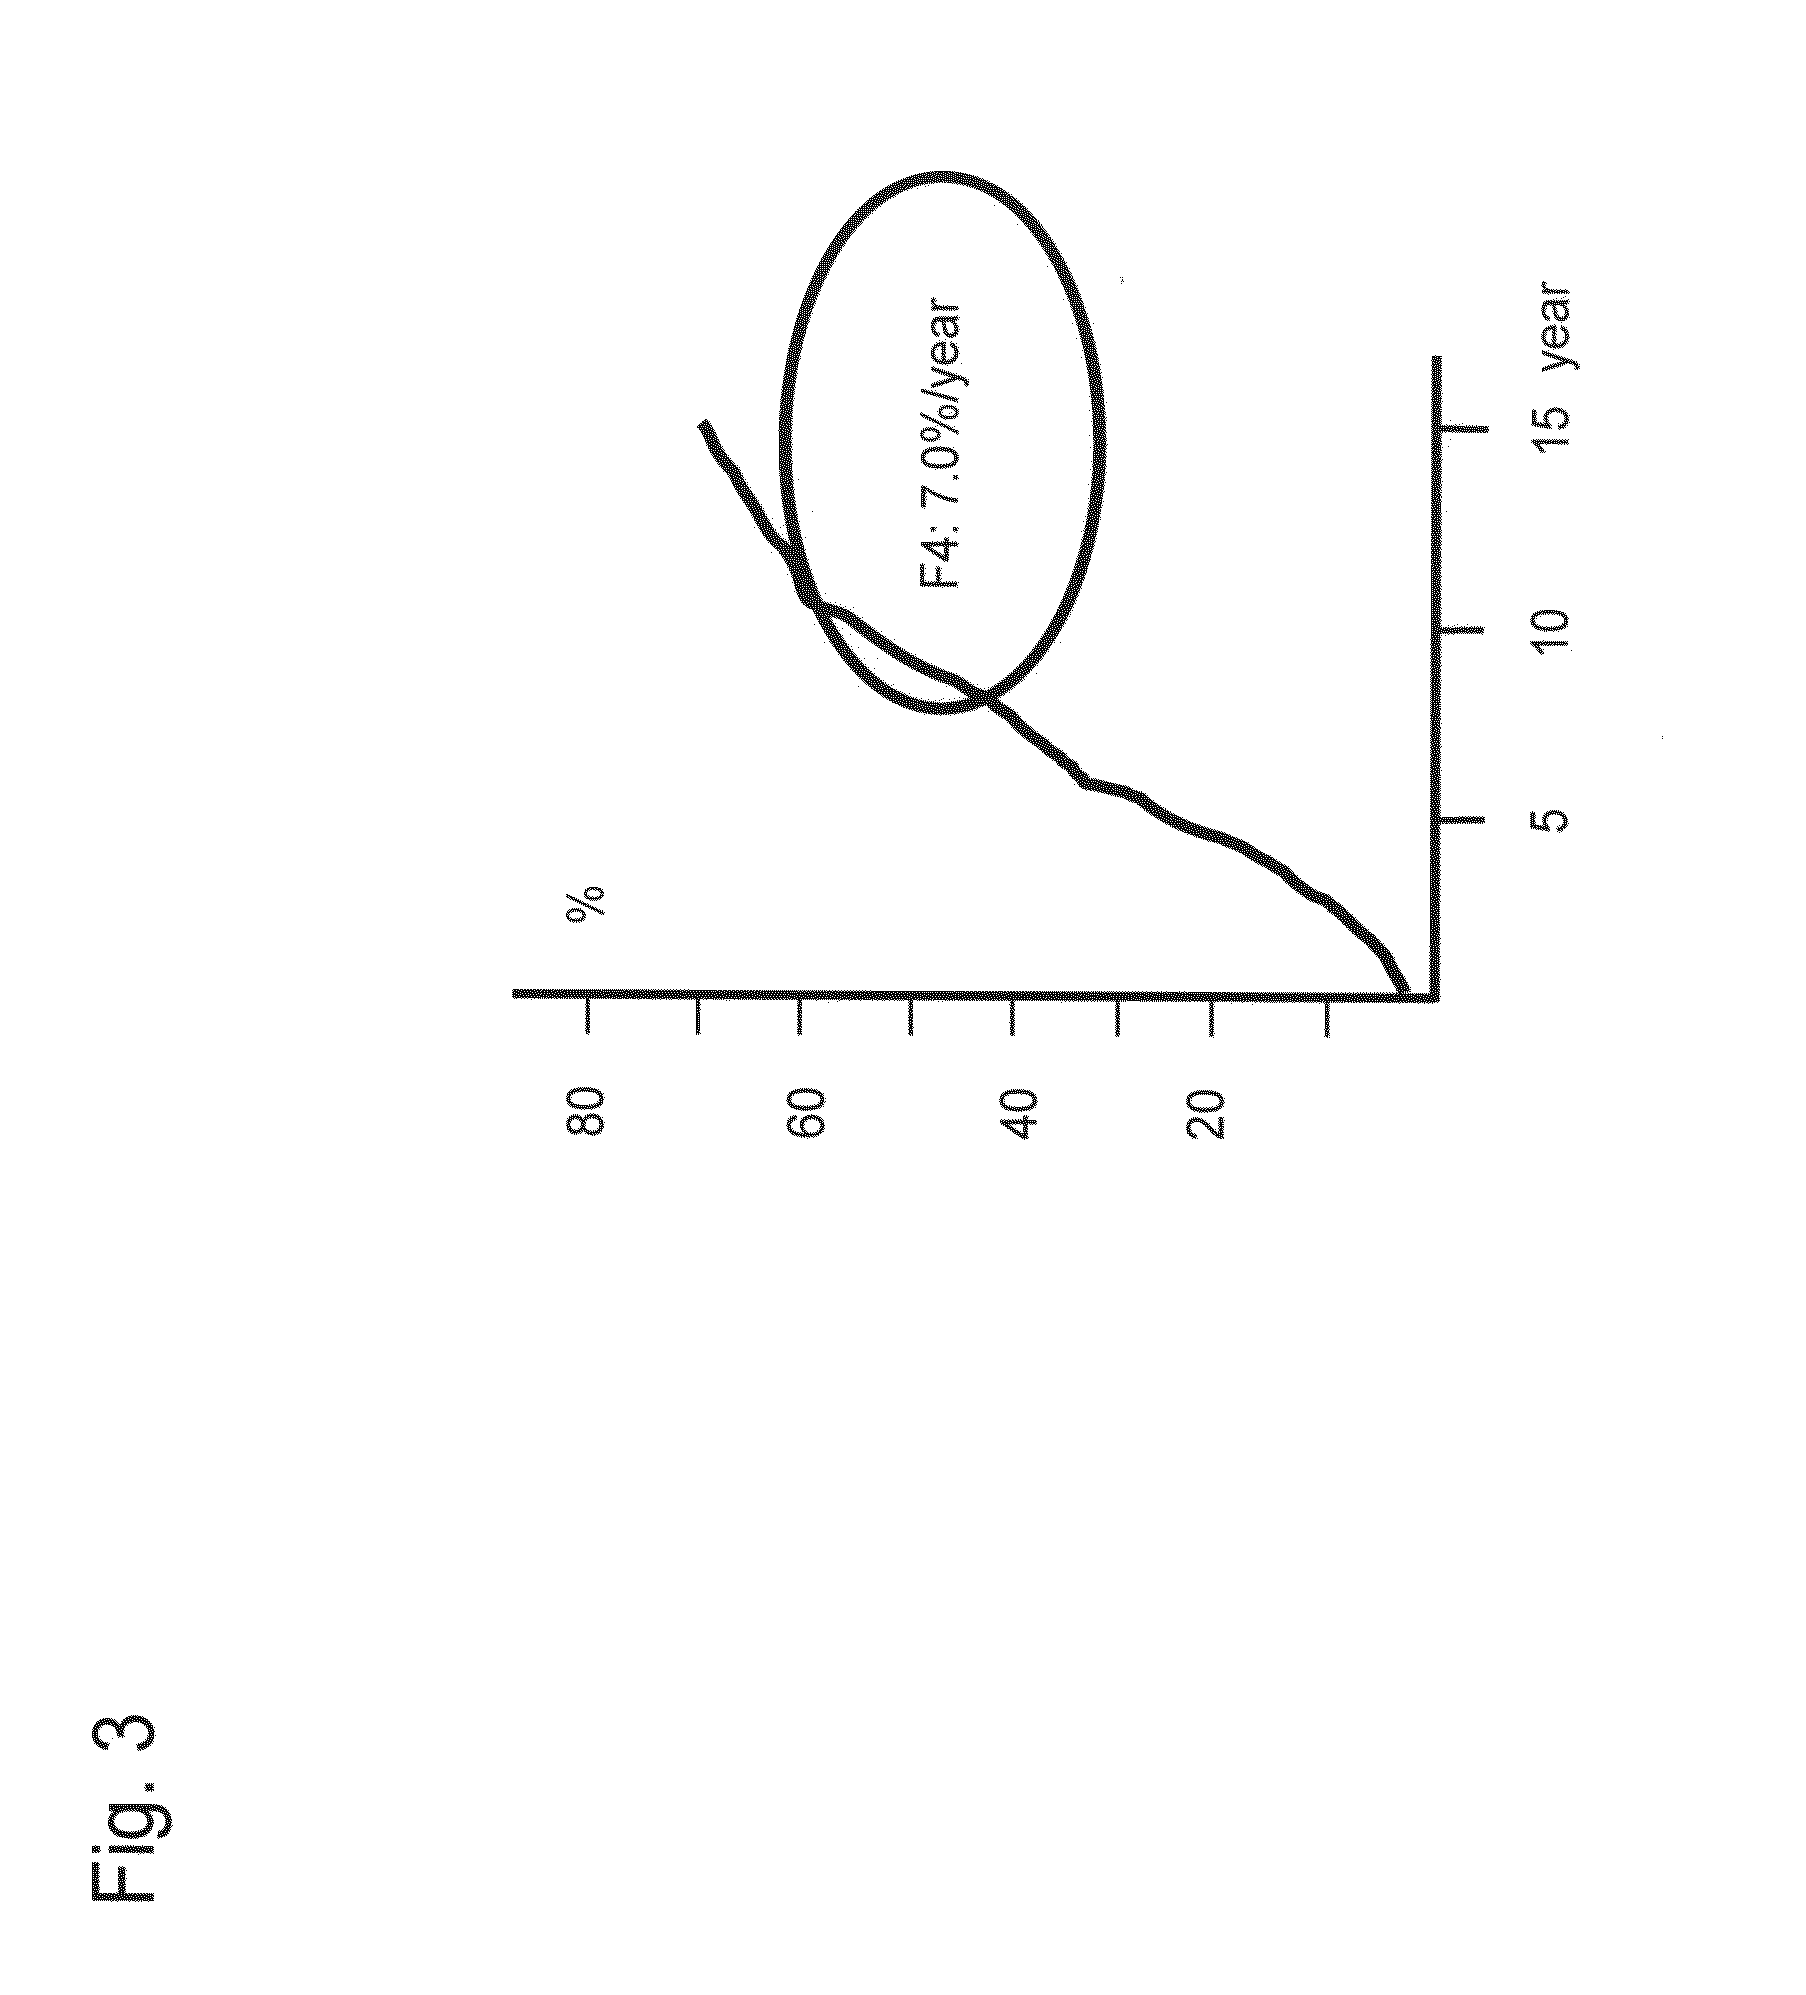 Method for measuring glycoprotein, method for examining liver disease, reagent for quantitative determination of glycoprotein, and glycan-marker glycoprotein as an index for clinical conditions of liver disease